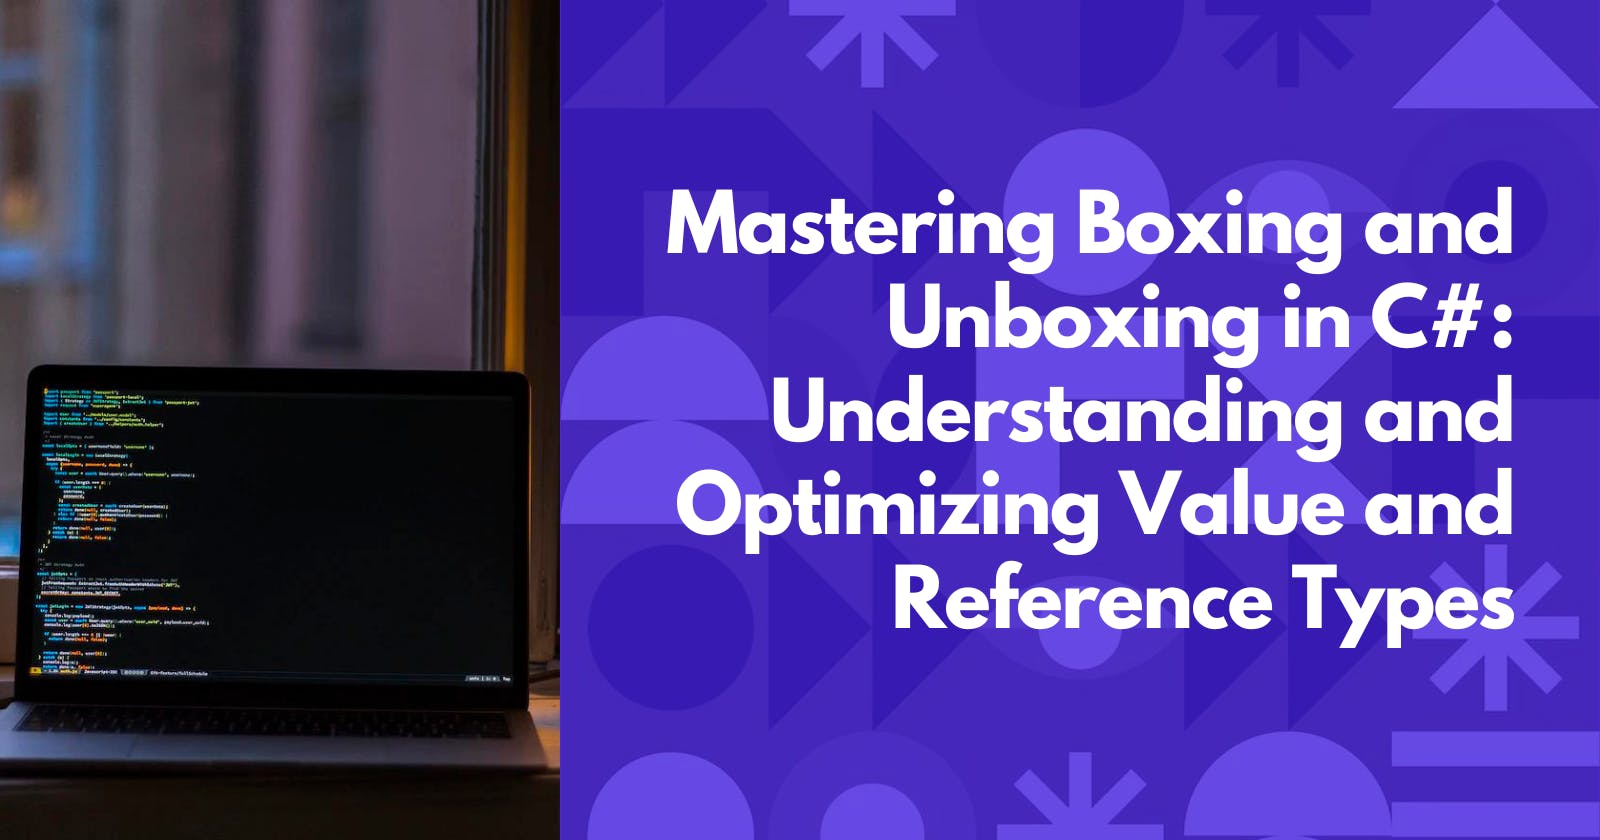 Mastering Boxing and Unboxing in C#: Understanding and Optimizing Value and Reference Types